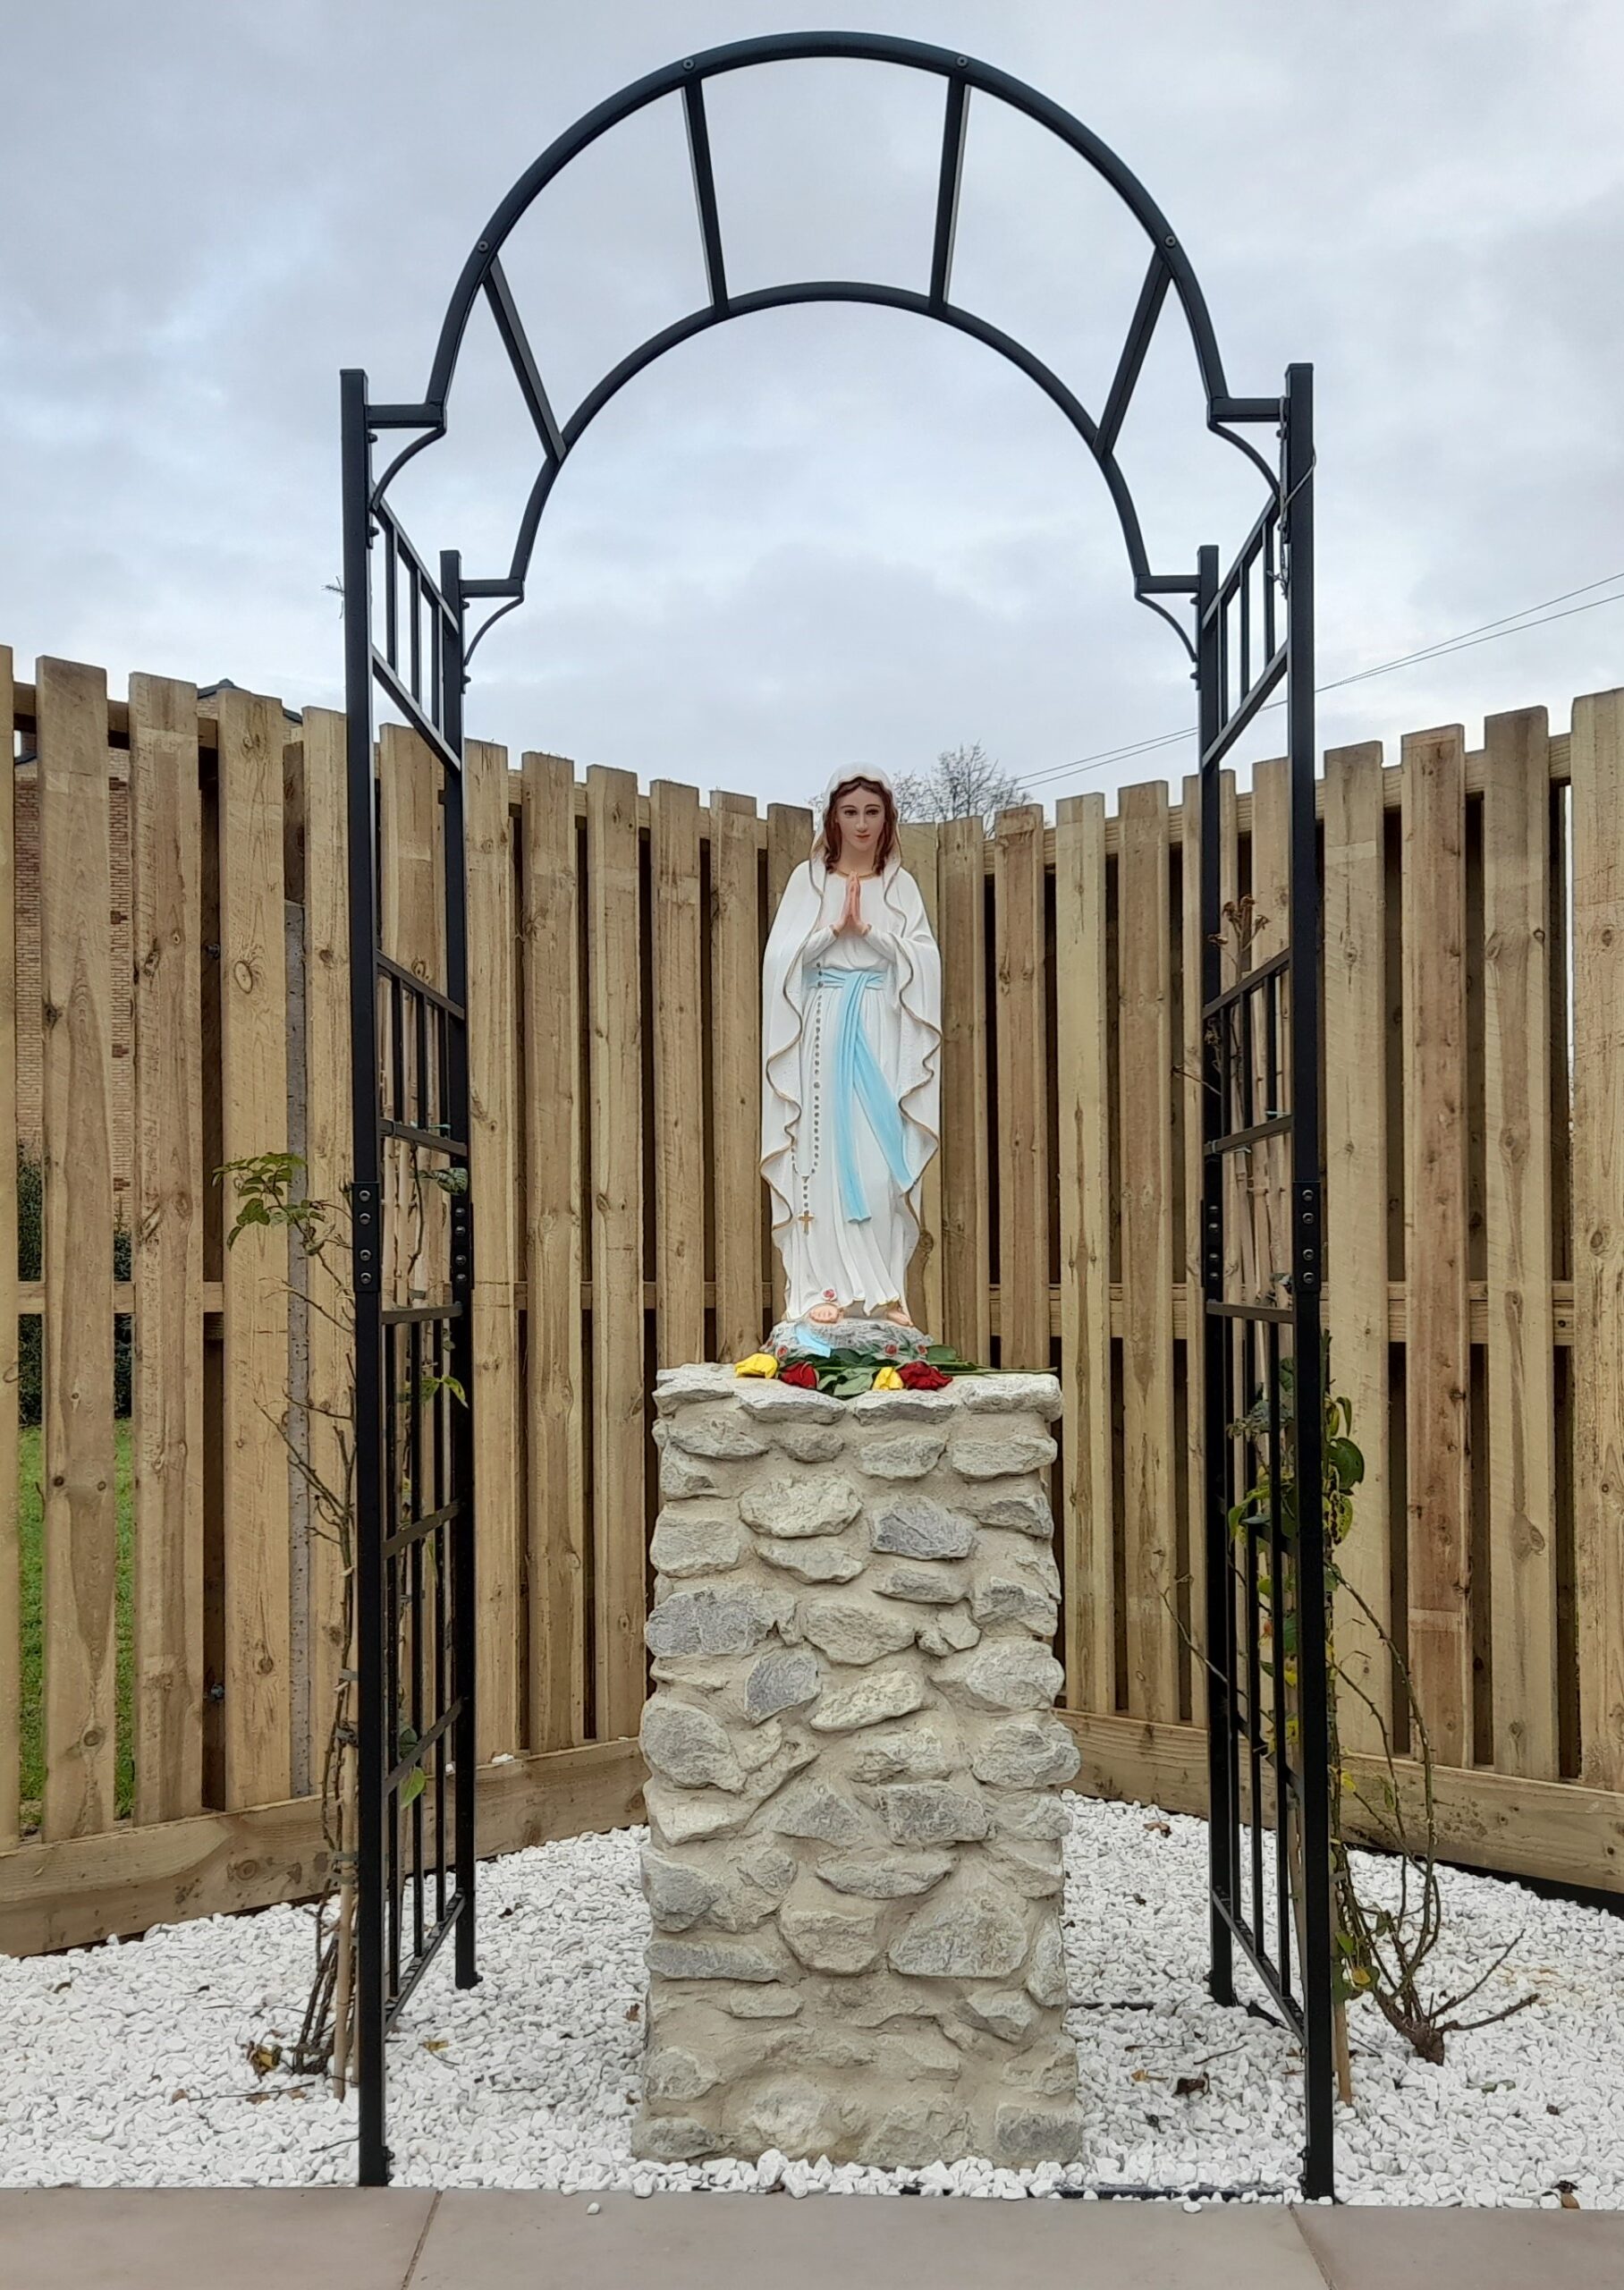 Statue of Our Lady in our Grotto